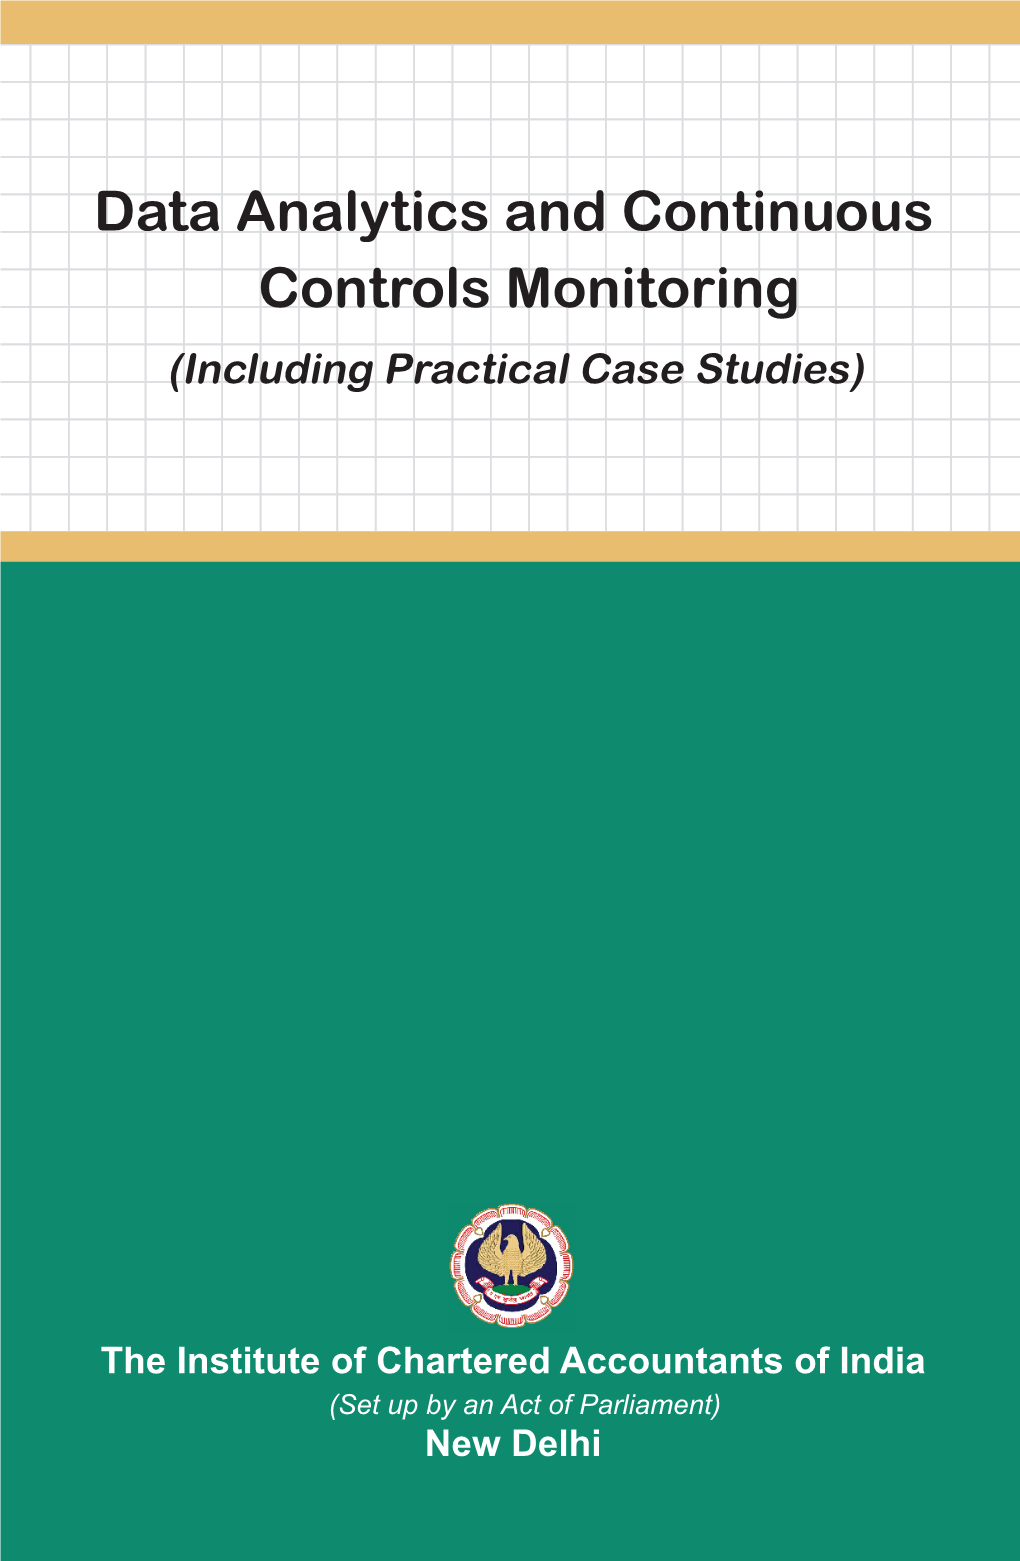 Data Analytics and Continuous Controls Monitoring